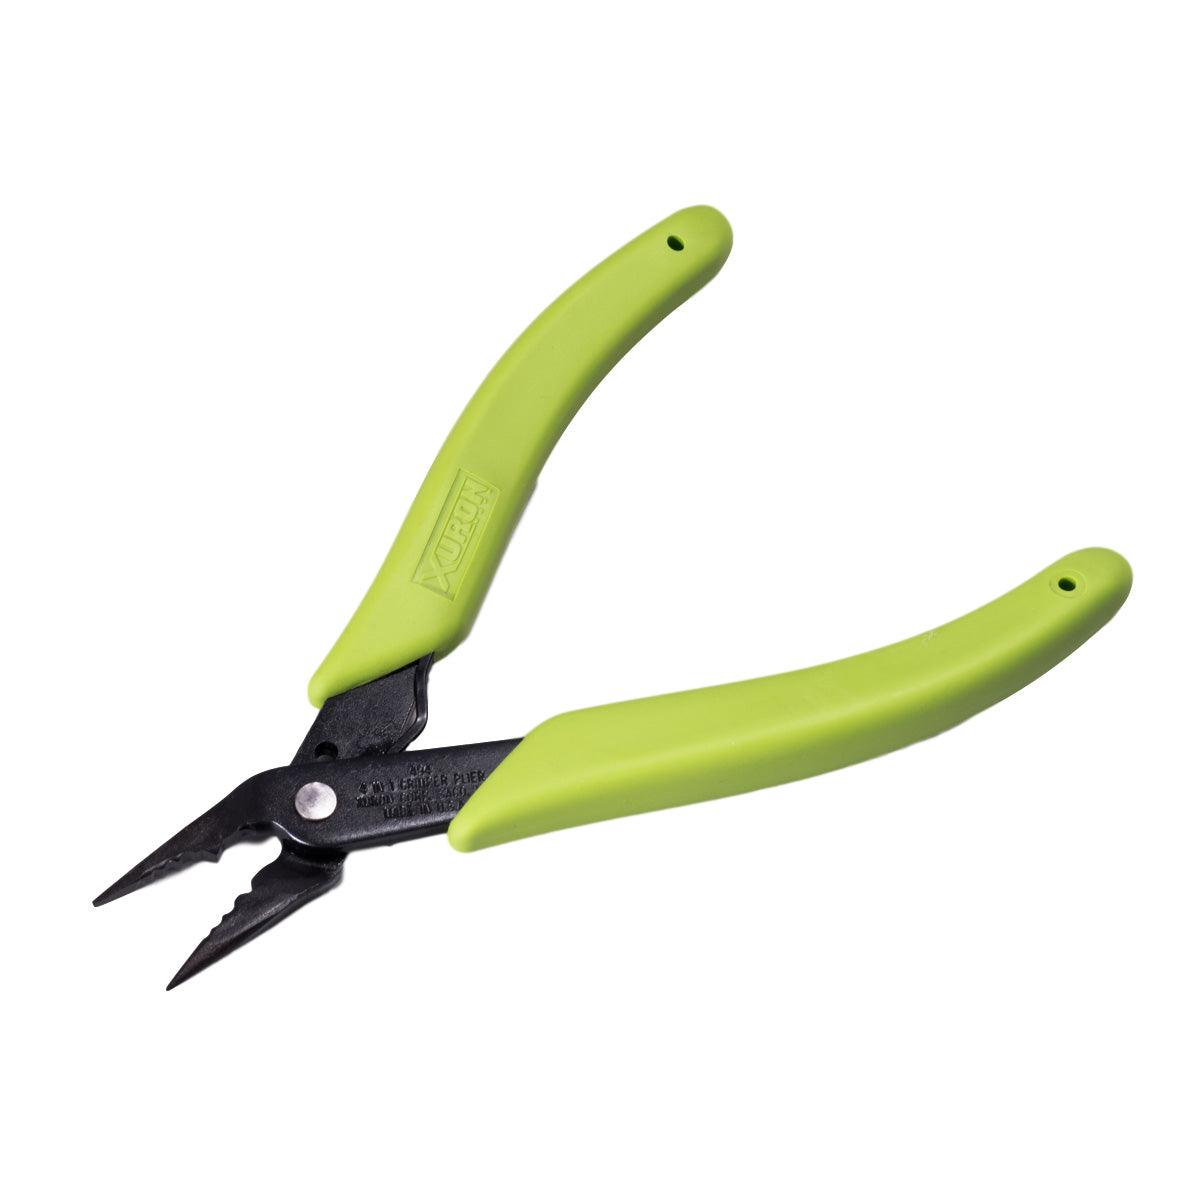 Xuron 4 In 1 Crimping Pliers - Works On 1, 2 And 3mm Crimps! 